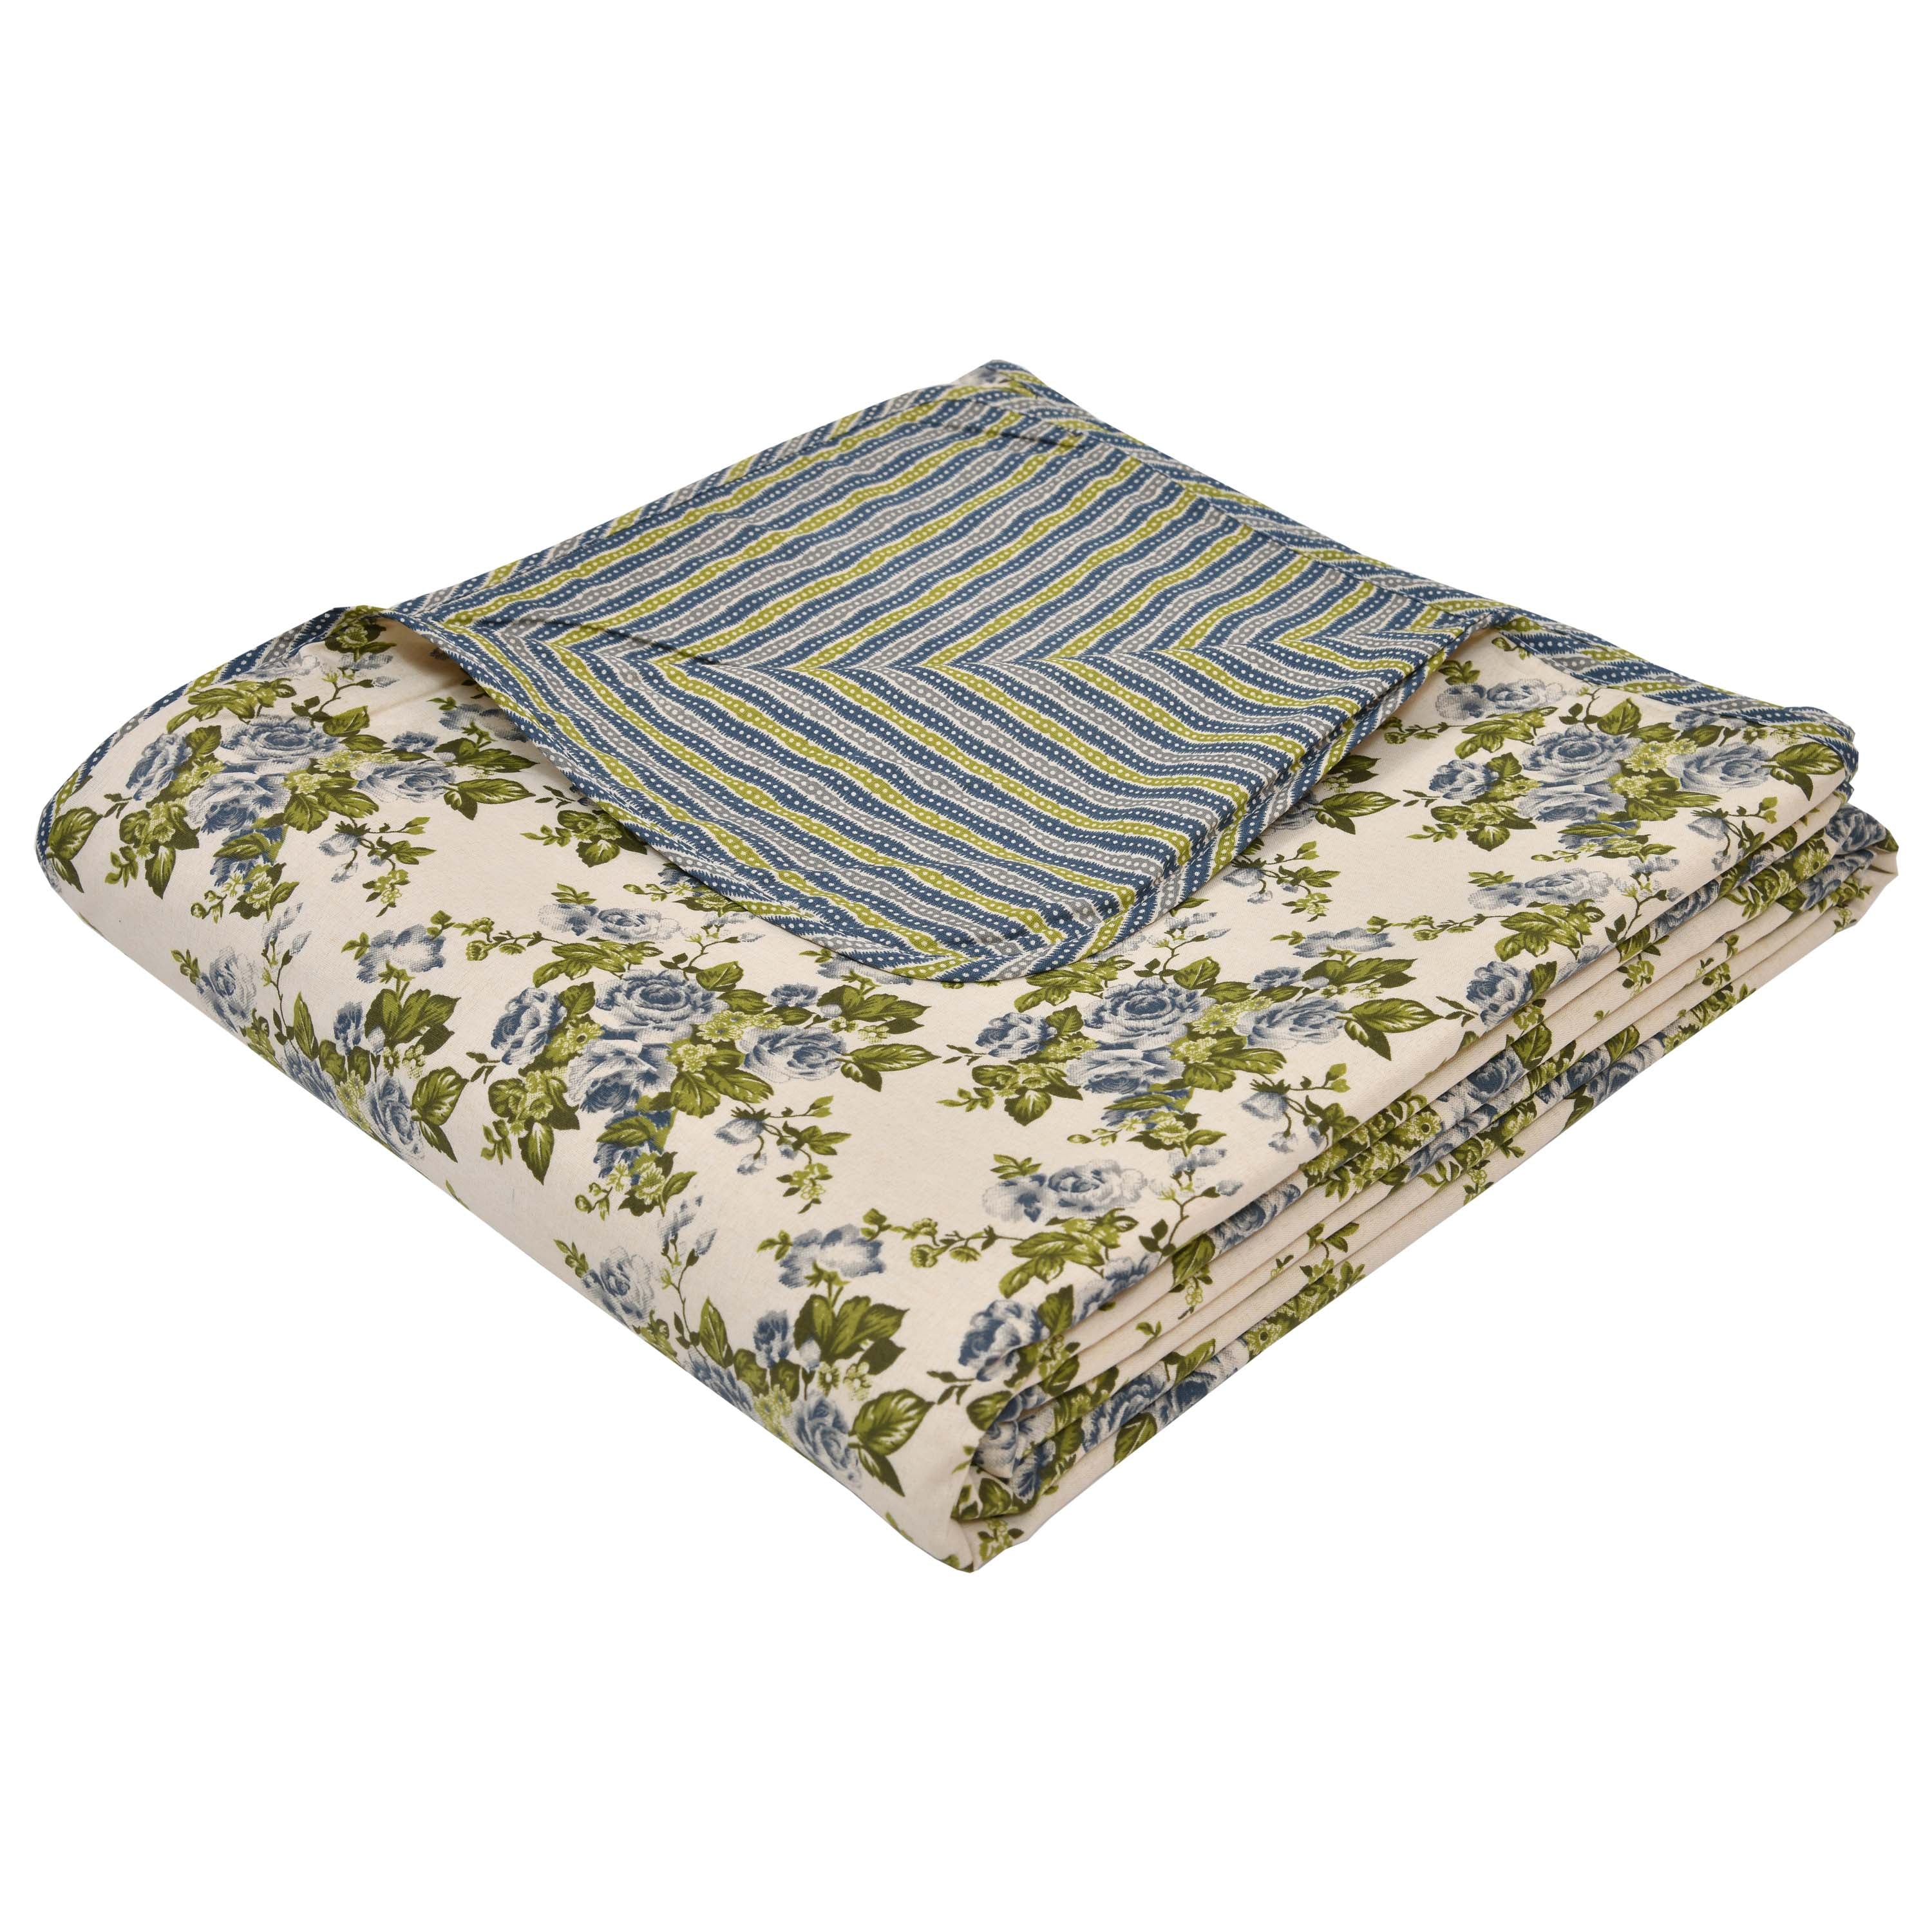 Dohar Cotton-Double Bed-Rose Bouquet Green N Blue